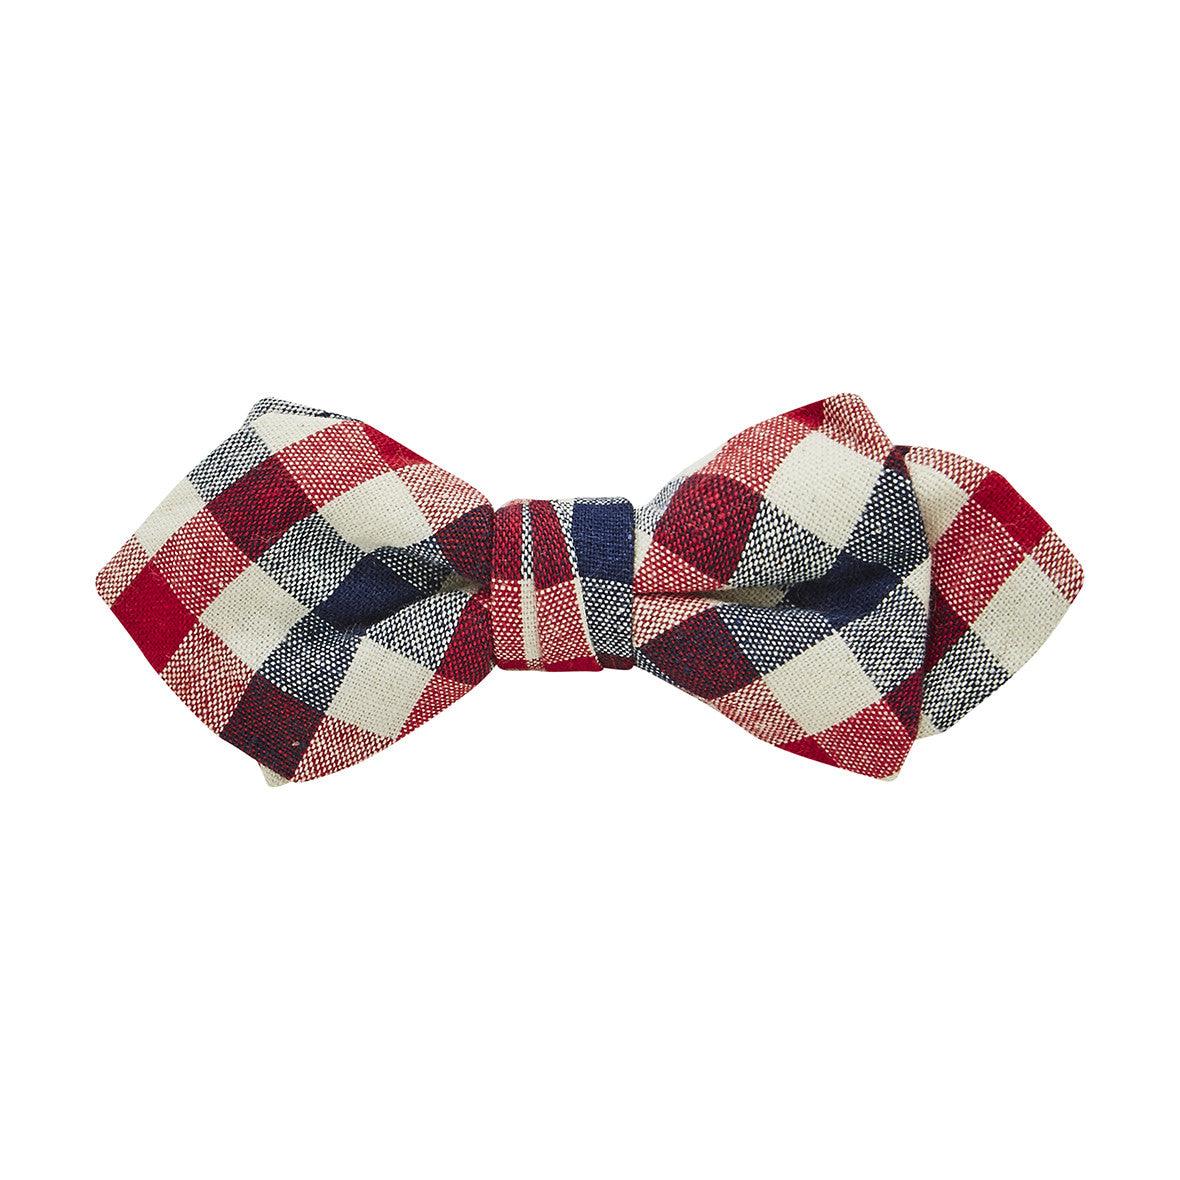 Buckle Plaid Bow Tie-Red - Harrys for Menswear